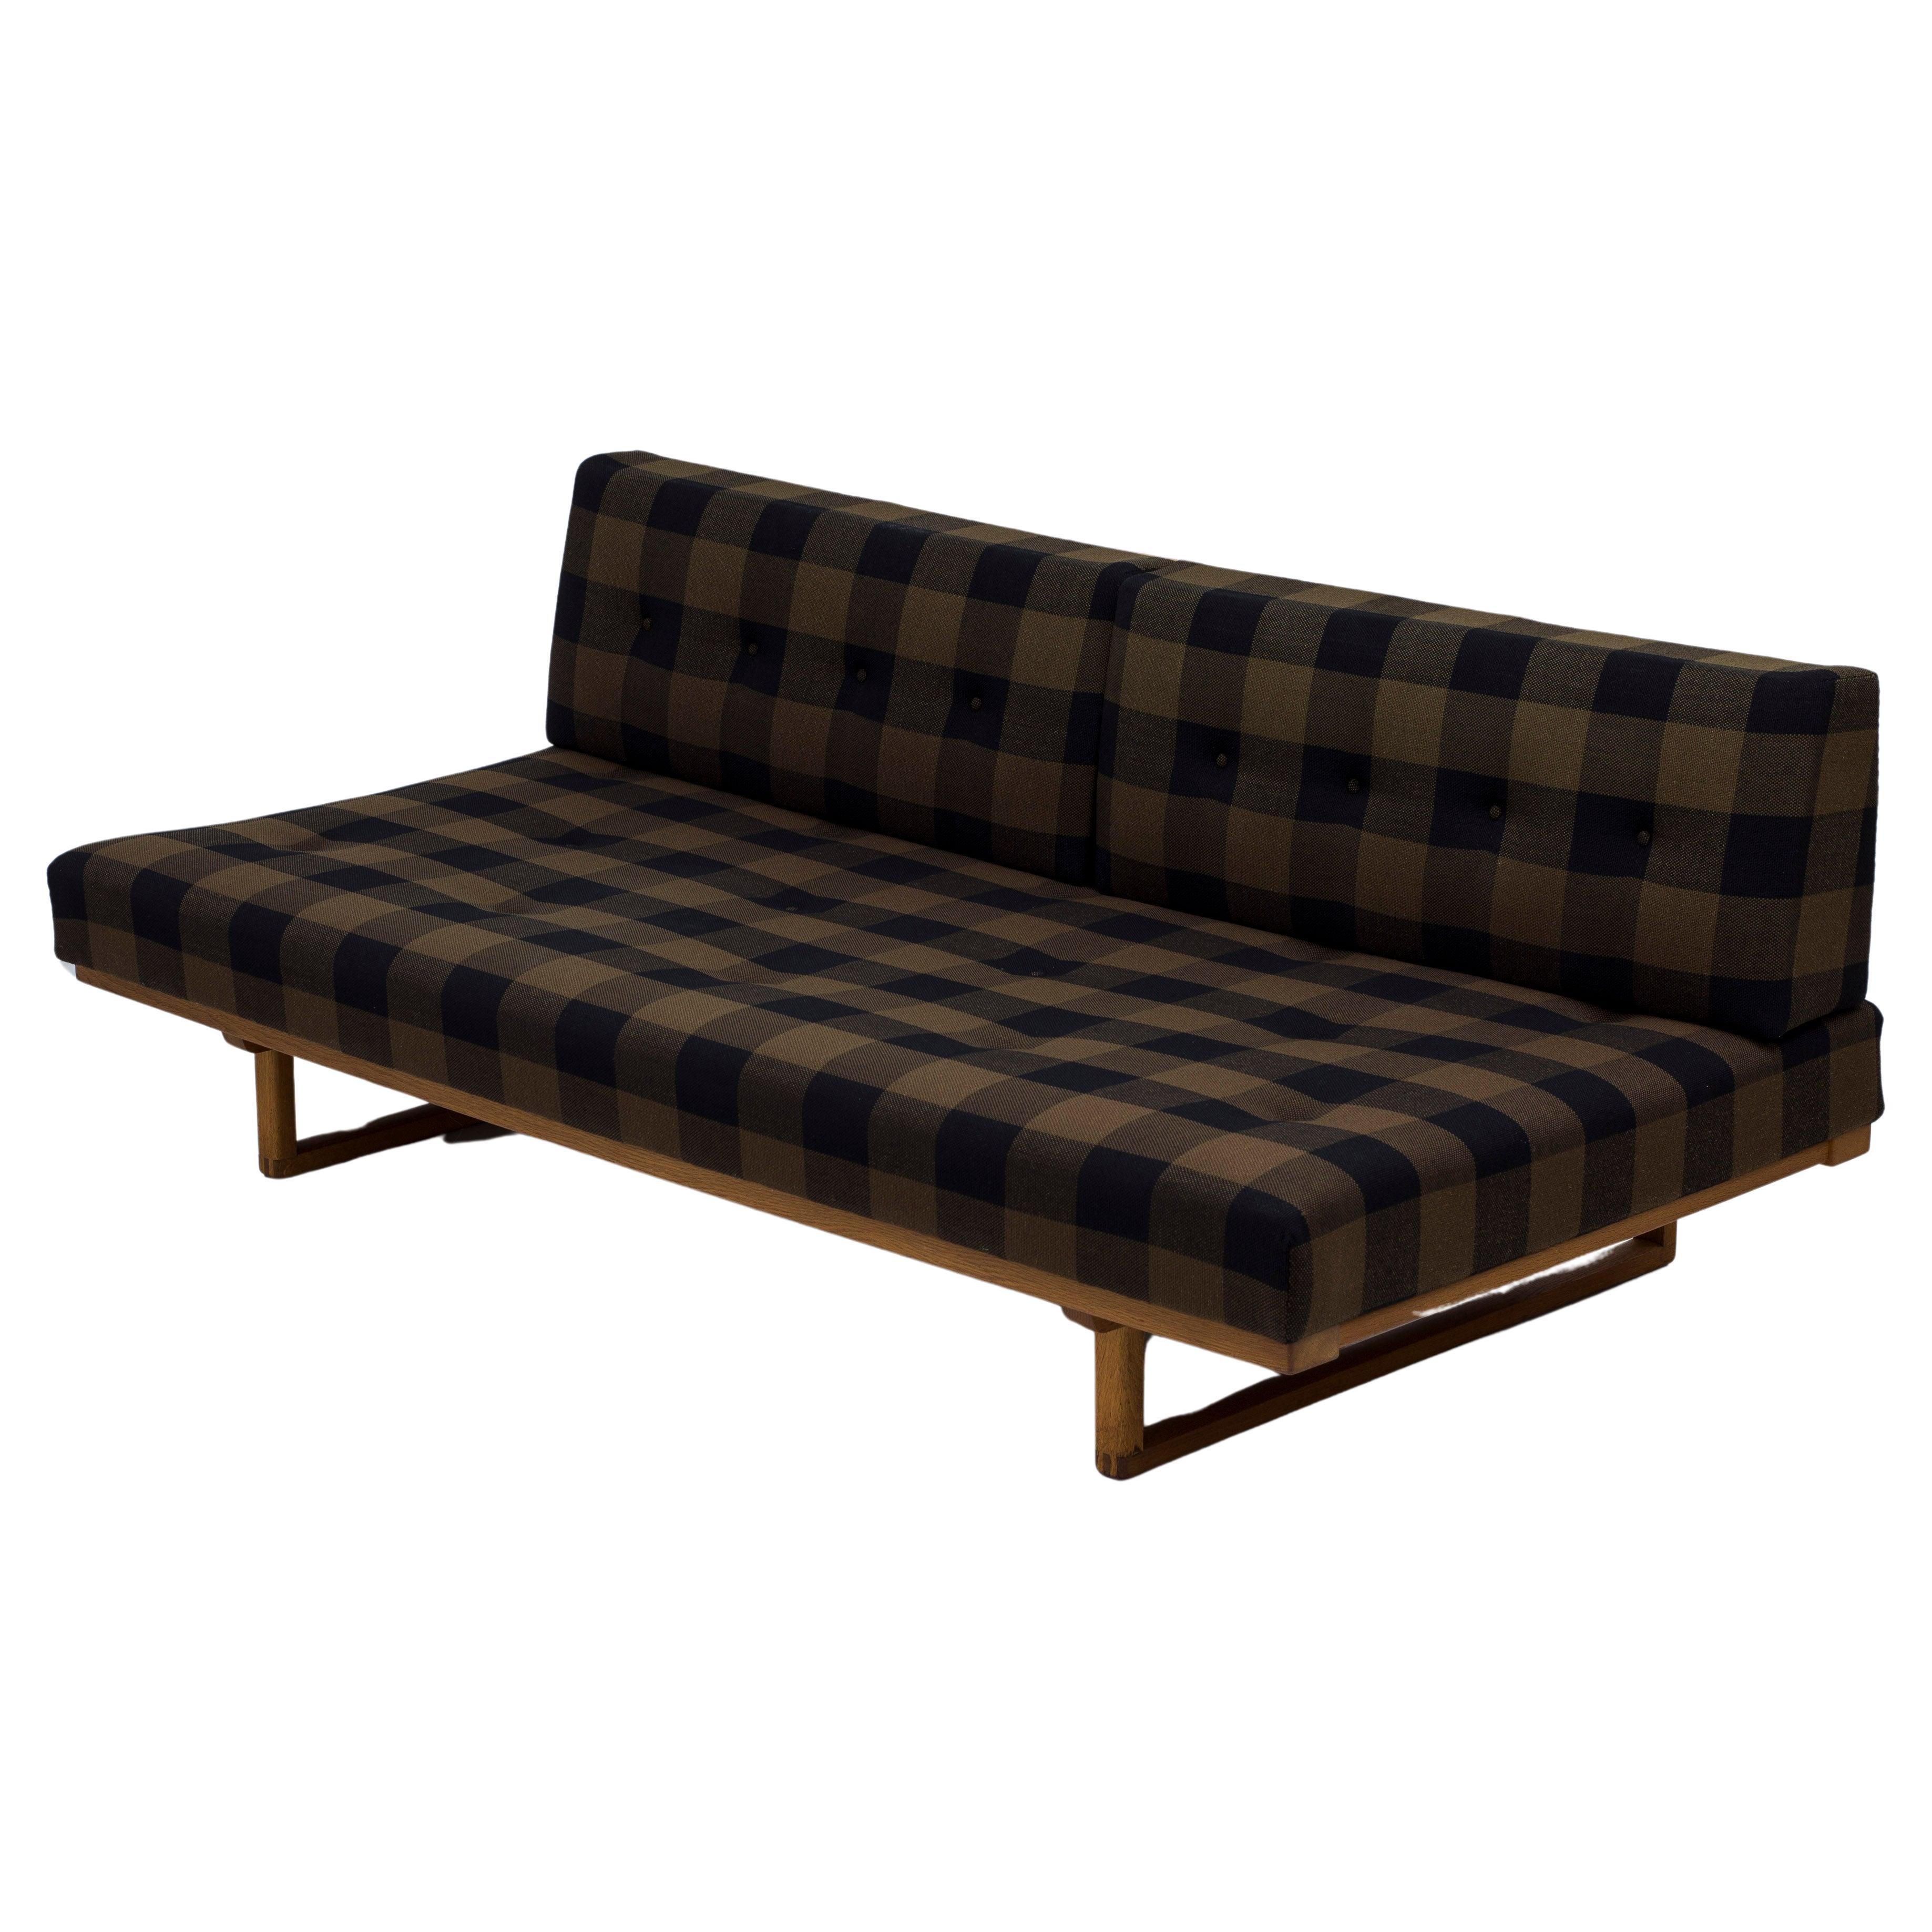 Sofa/daybed in oak and checkered original fabric by Børge Mogensen & Lis Ahlman For Sale